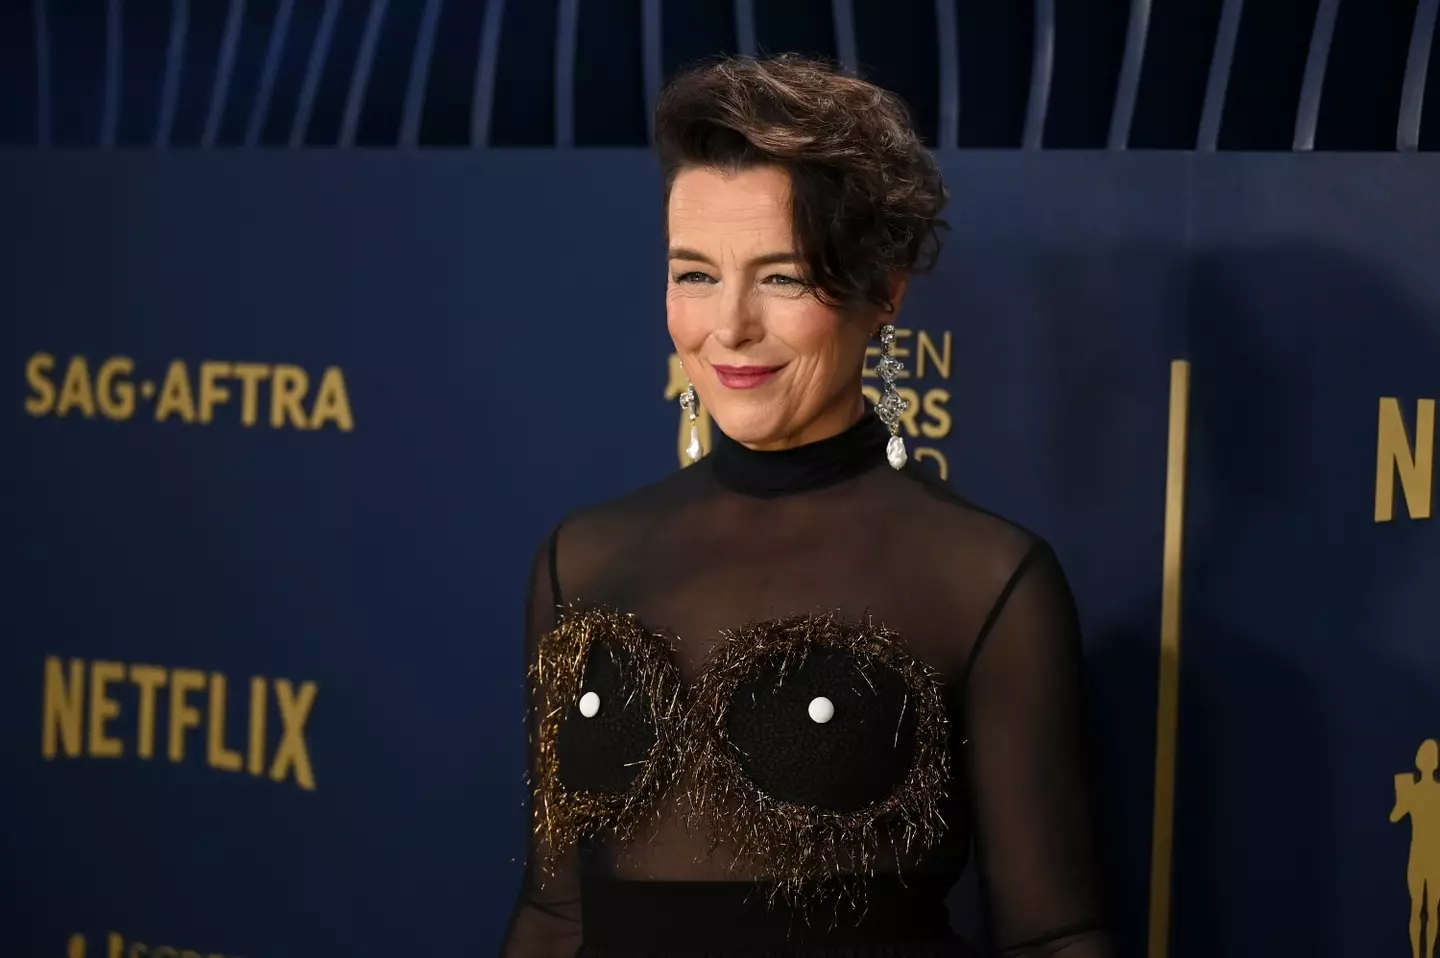 Olivia Williams opened up about her experience guest starring on Friends (Gilbert Flores/Variety via Getty Images)